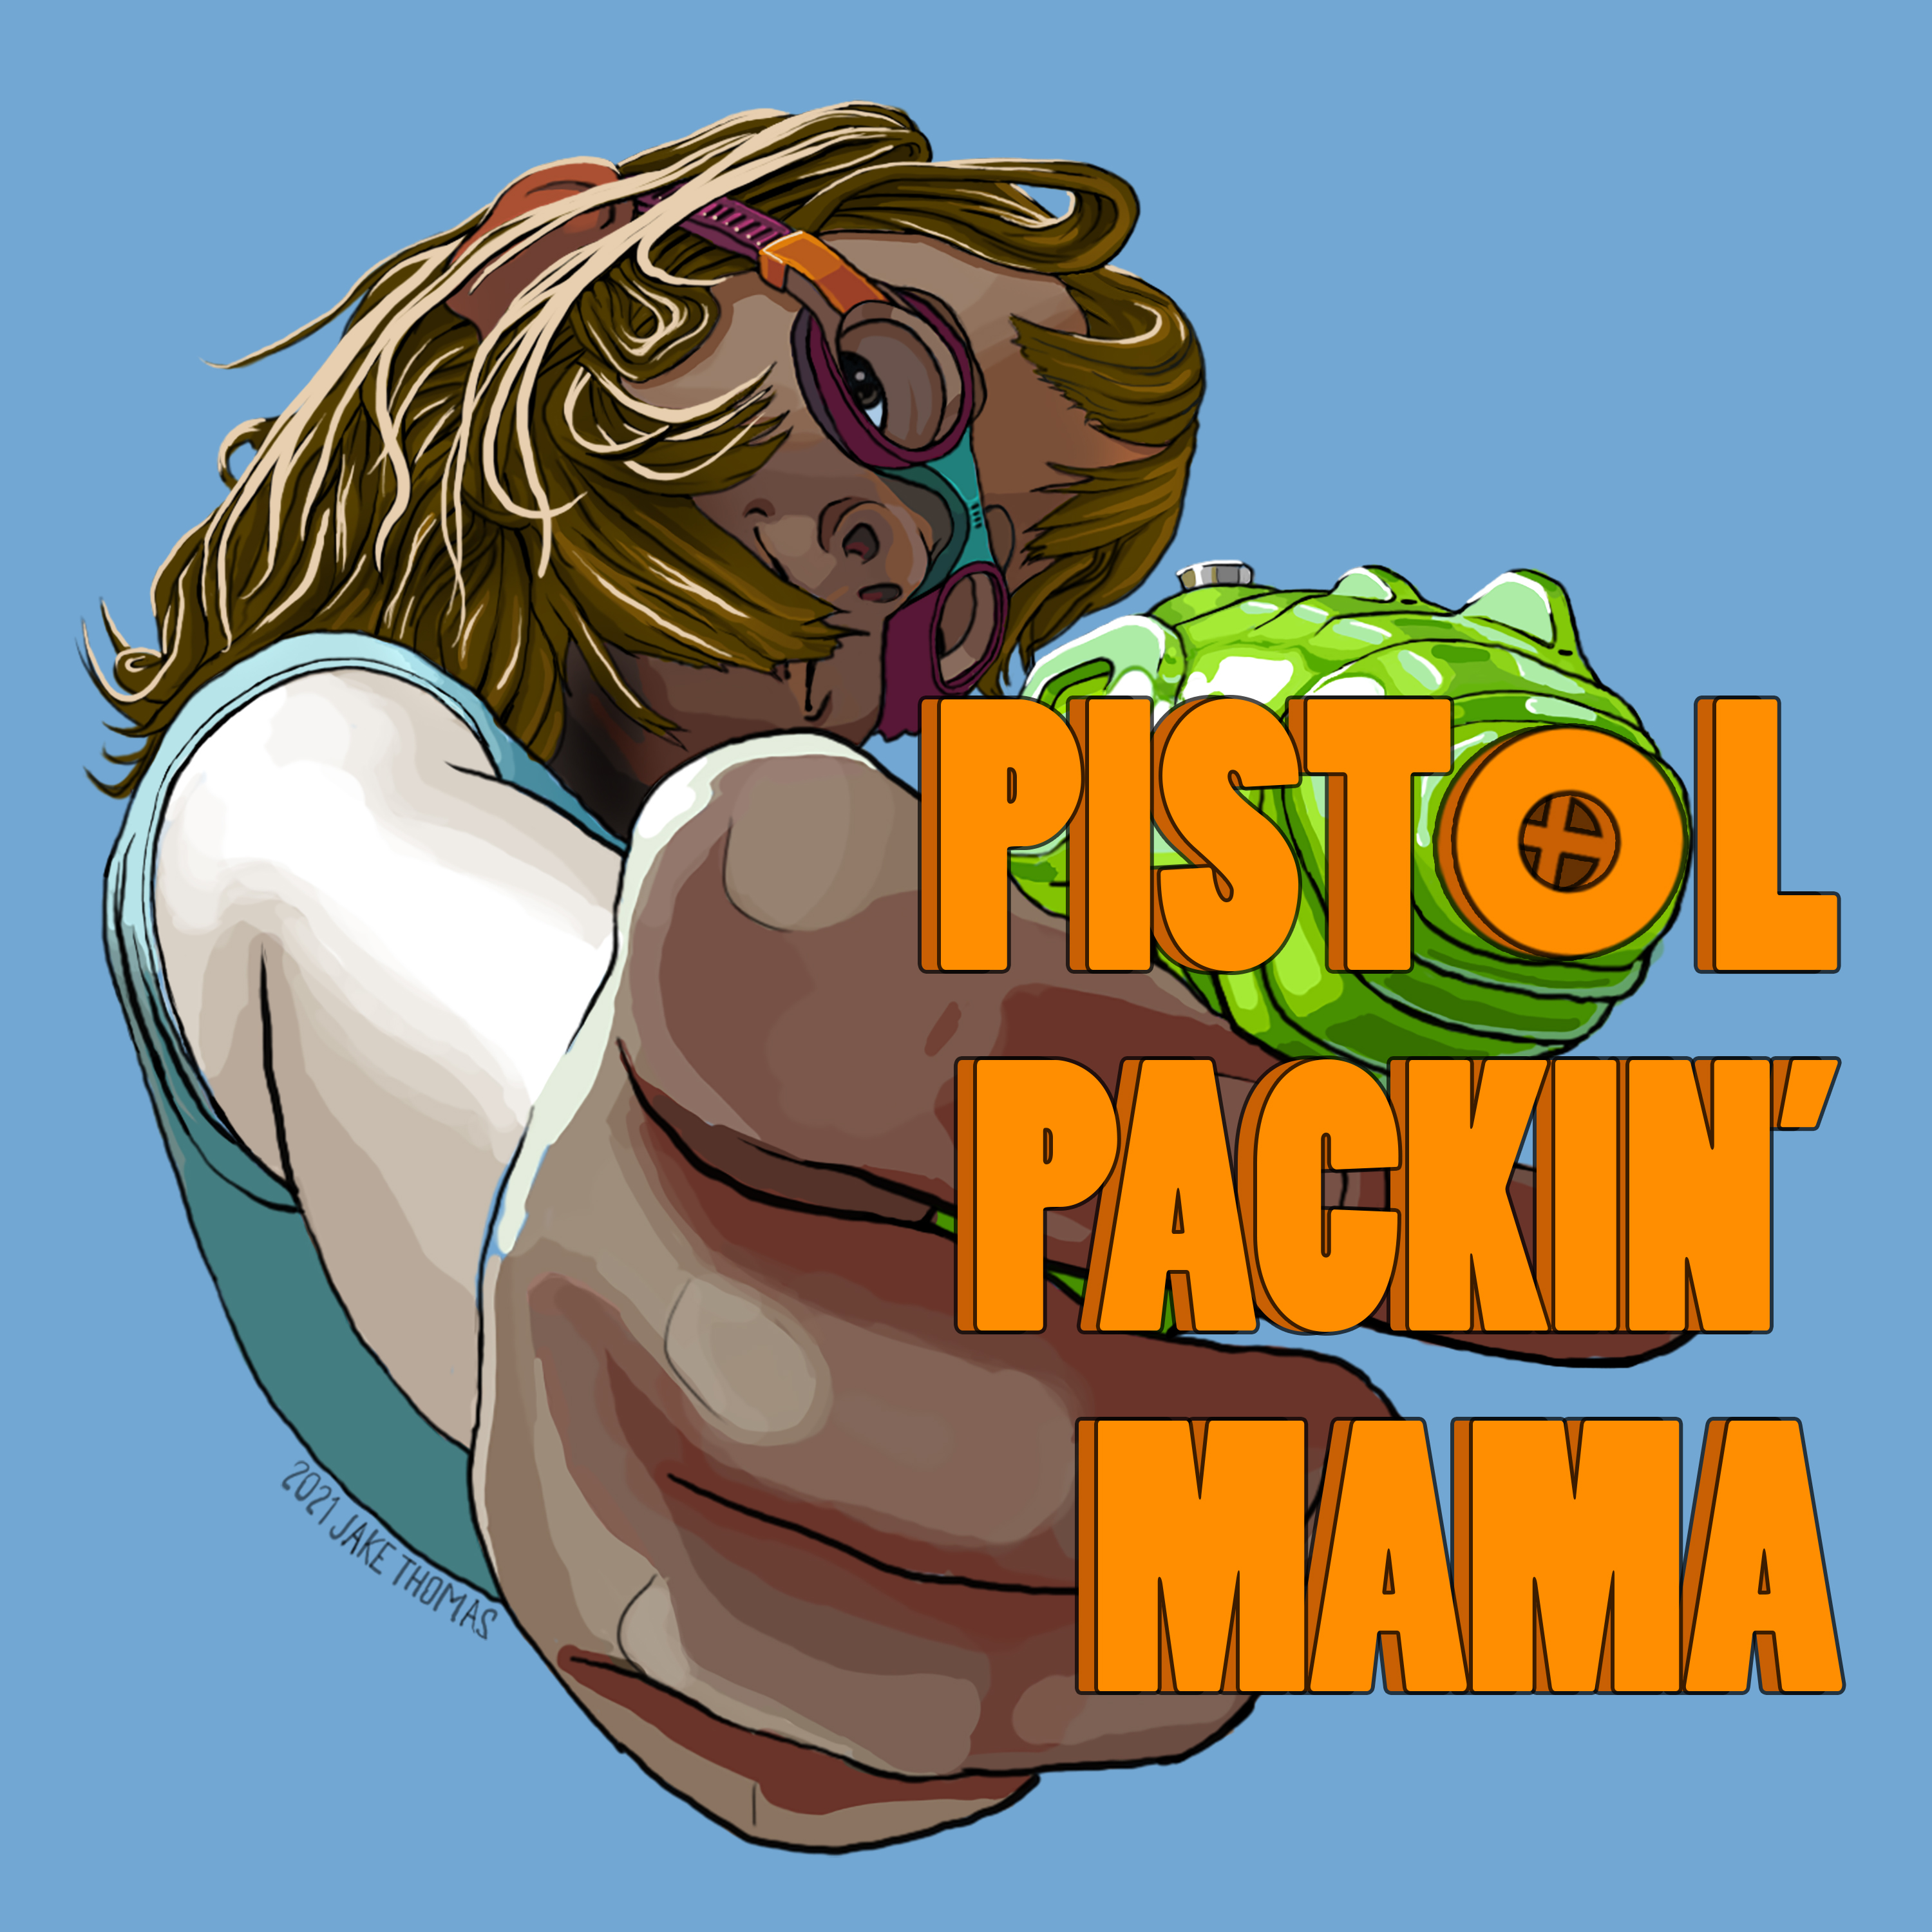 CD cover for Pistol-Packin Mama